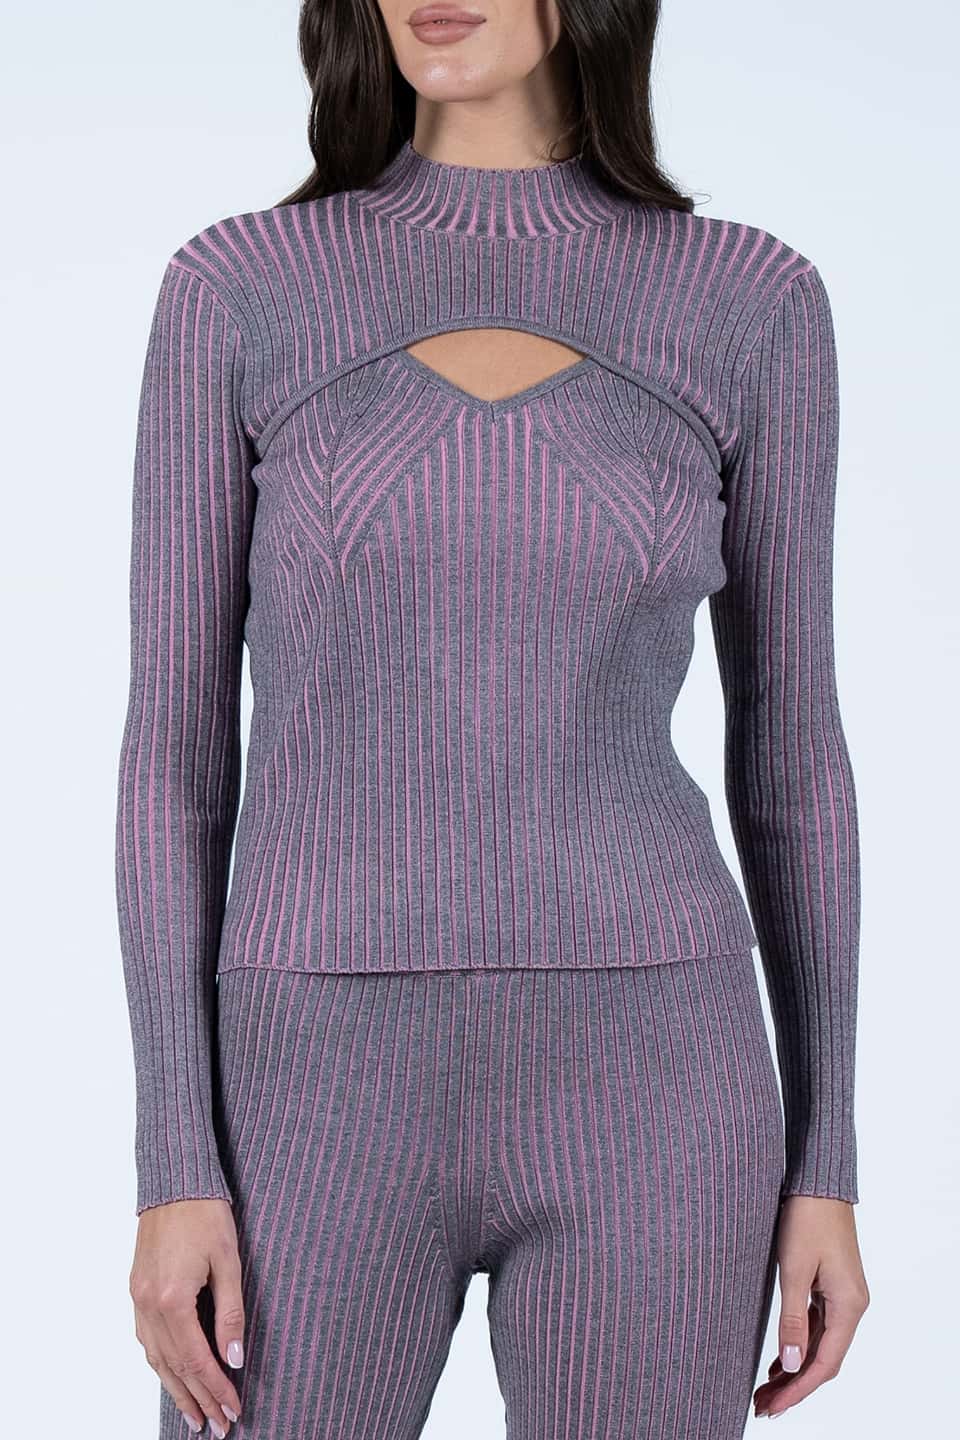 Thumbnail for Product gallery 1, Rose Knit Turtleneck Sweater